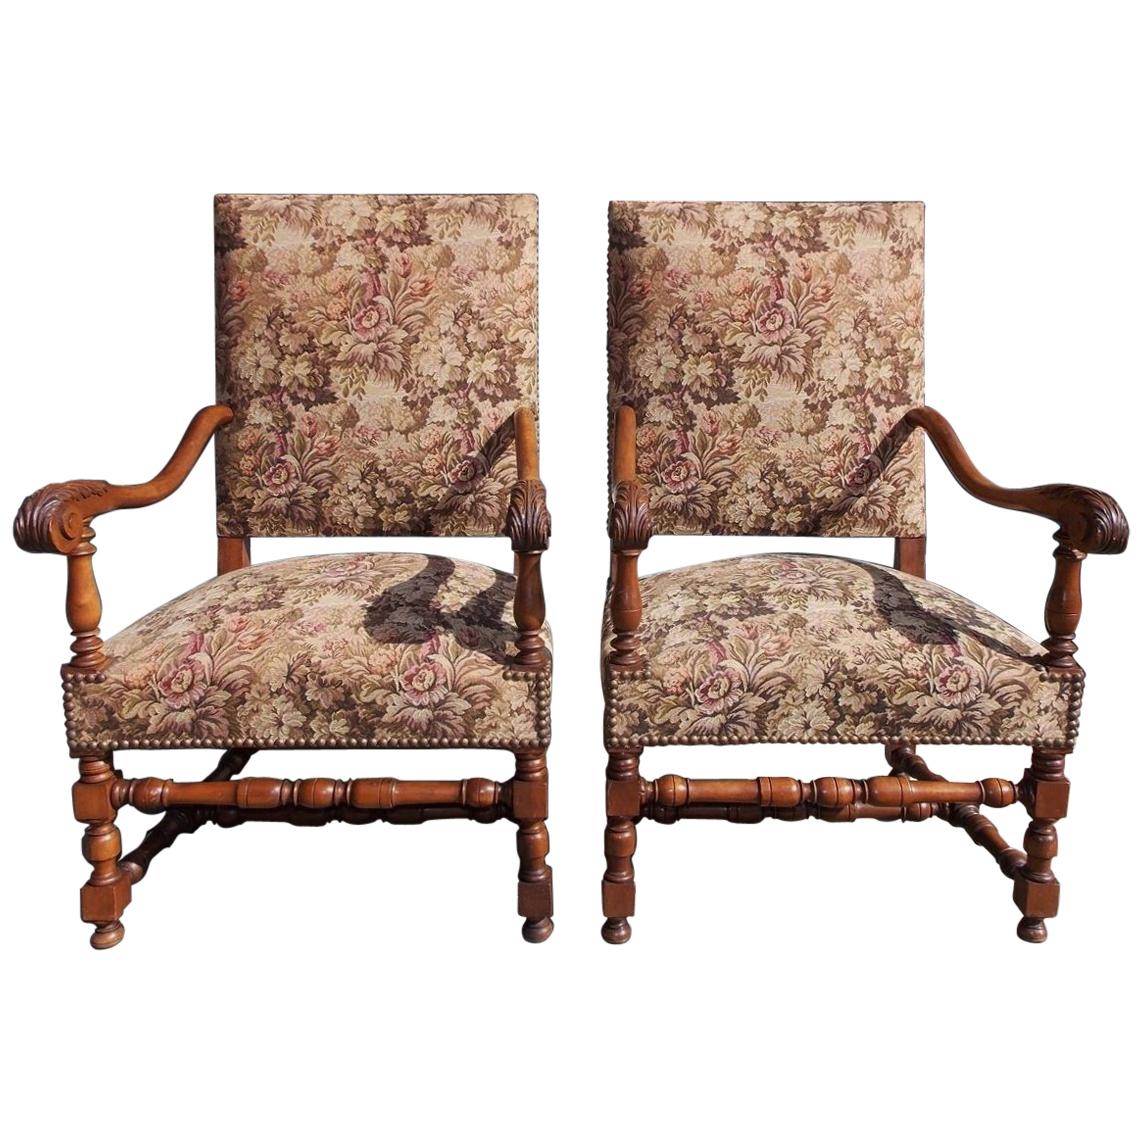 Pair of Italian Neoclassical Walnut Acanthus Upholstered Armchairs, Circa 1850